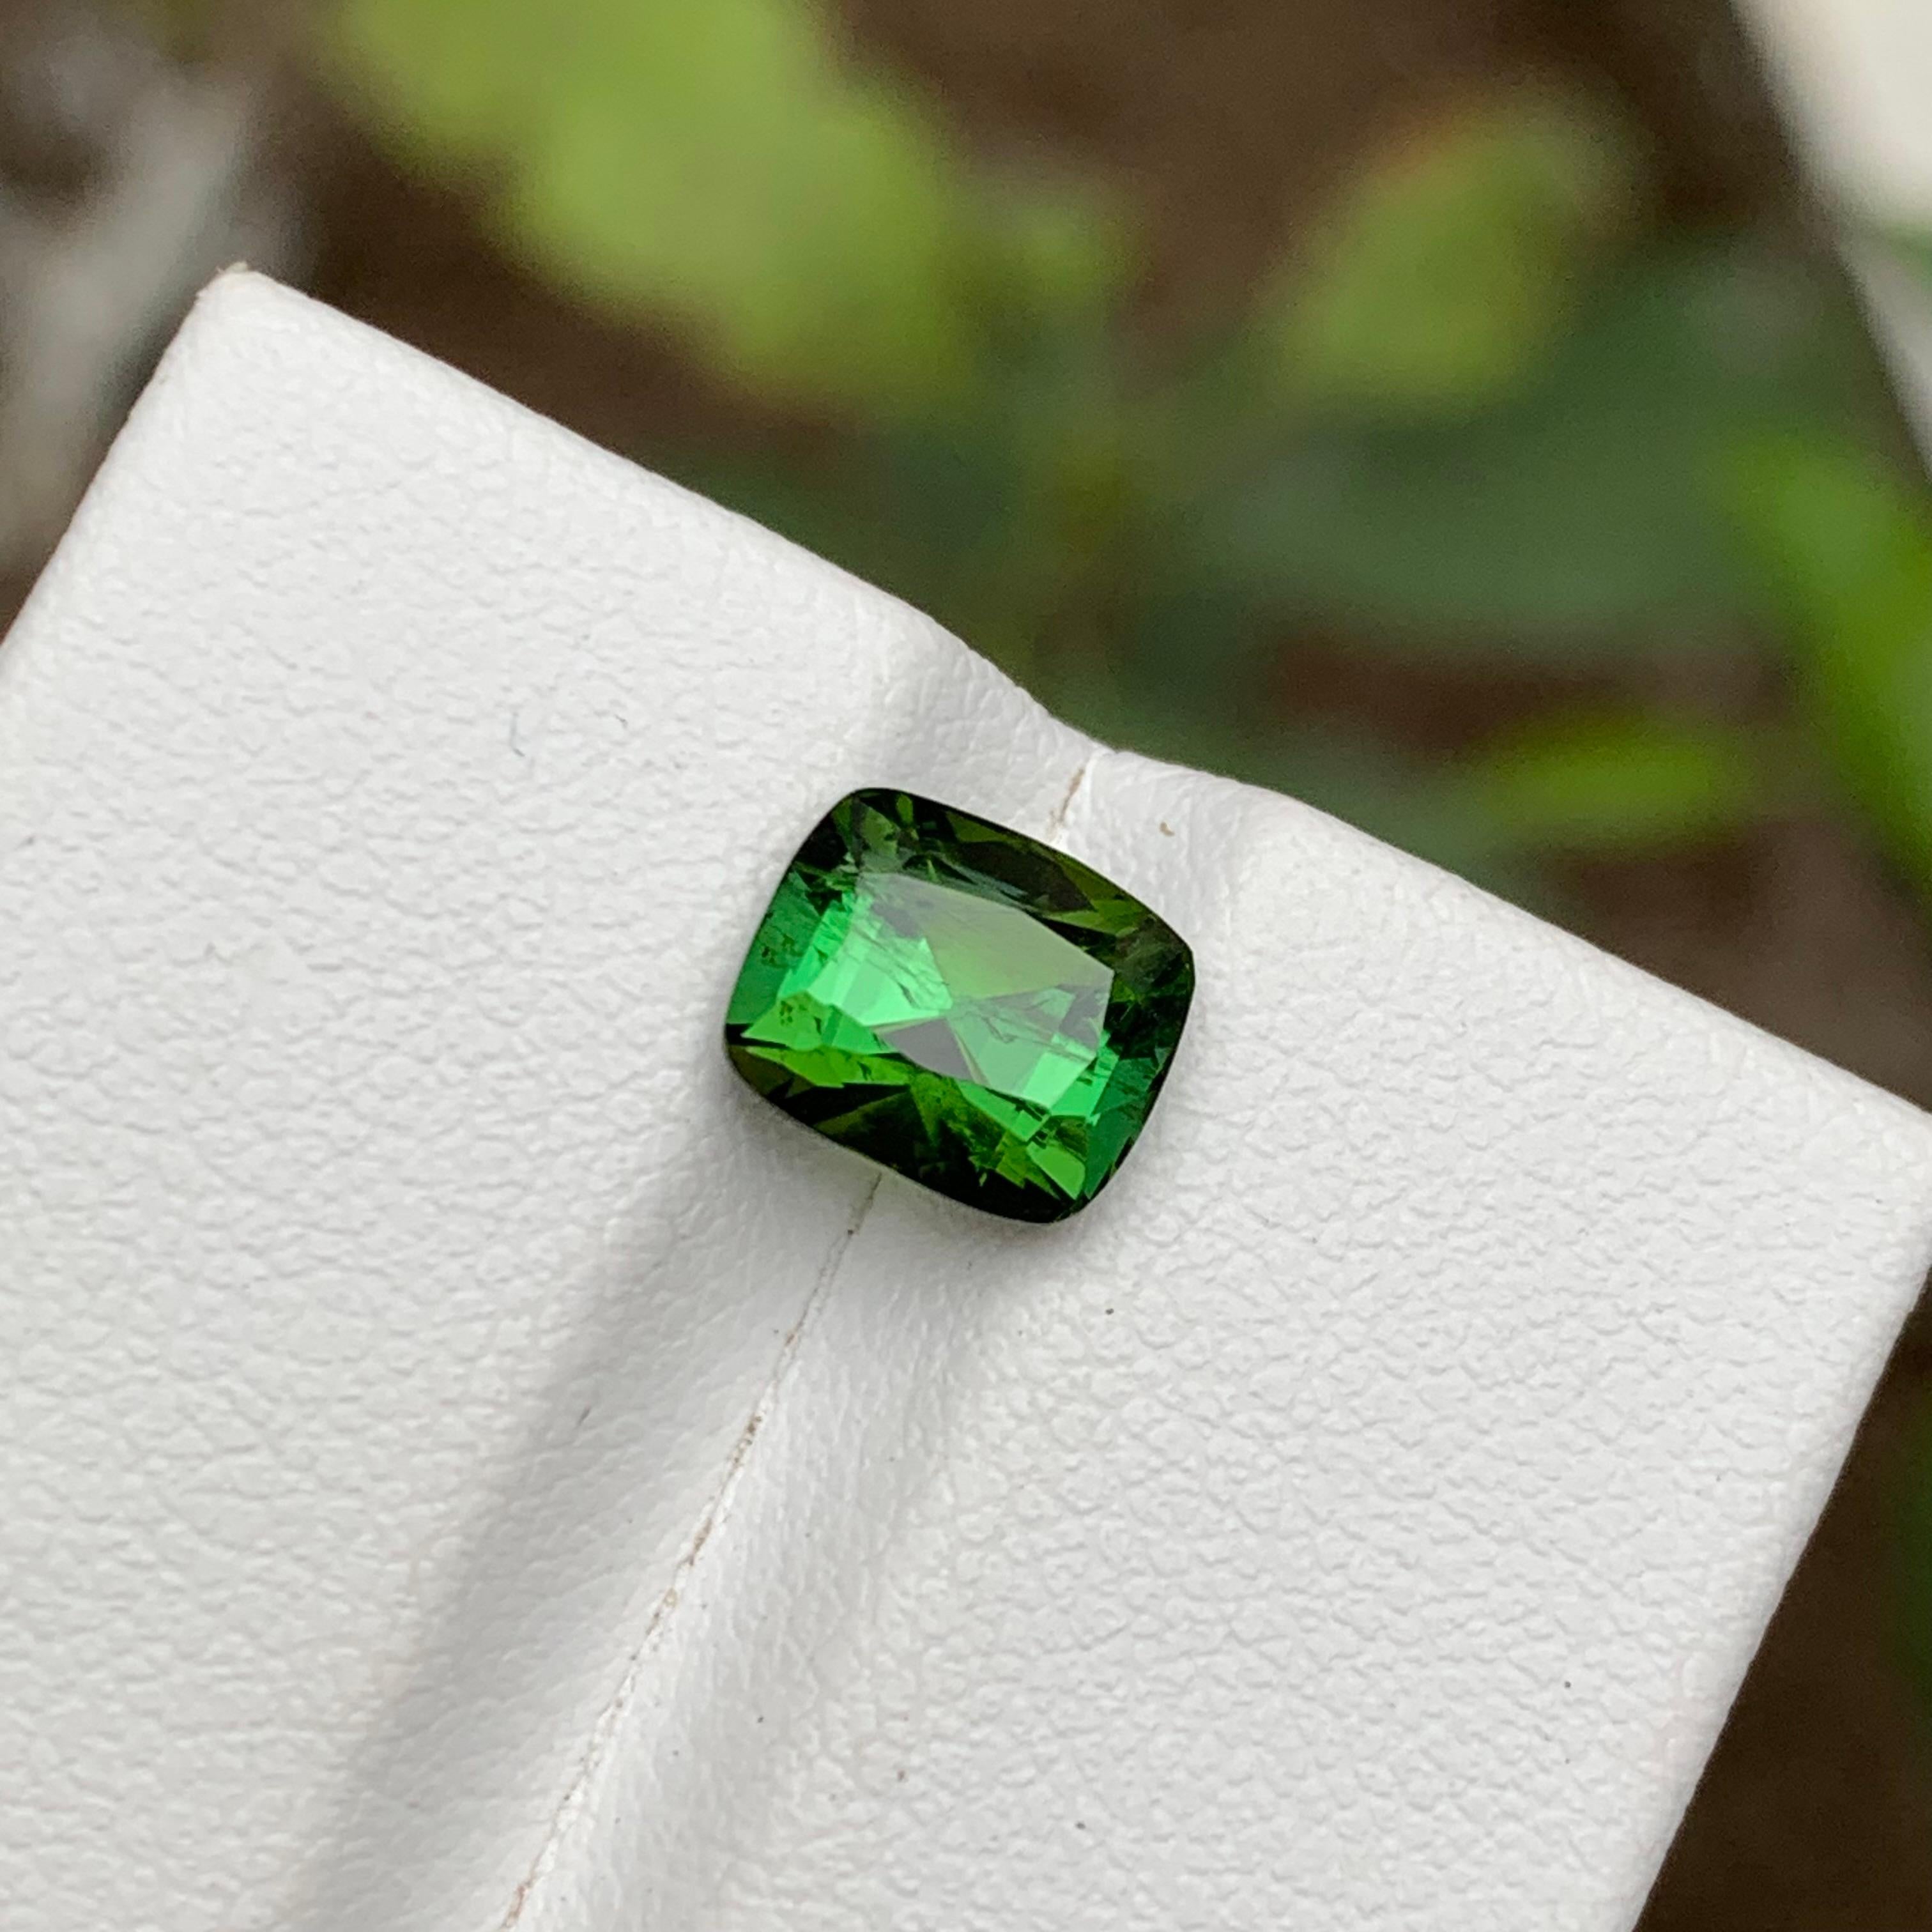 Rare Green Natural Tourmaline Loose Gemstone 2.10Ct Cushion Cut for Ring/Jewelry For Sale 7